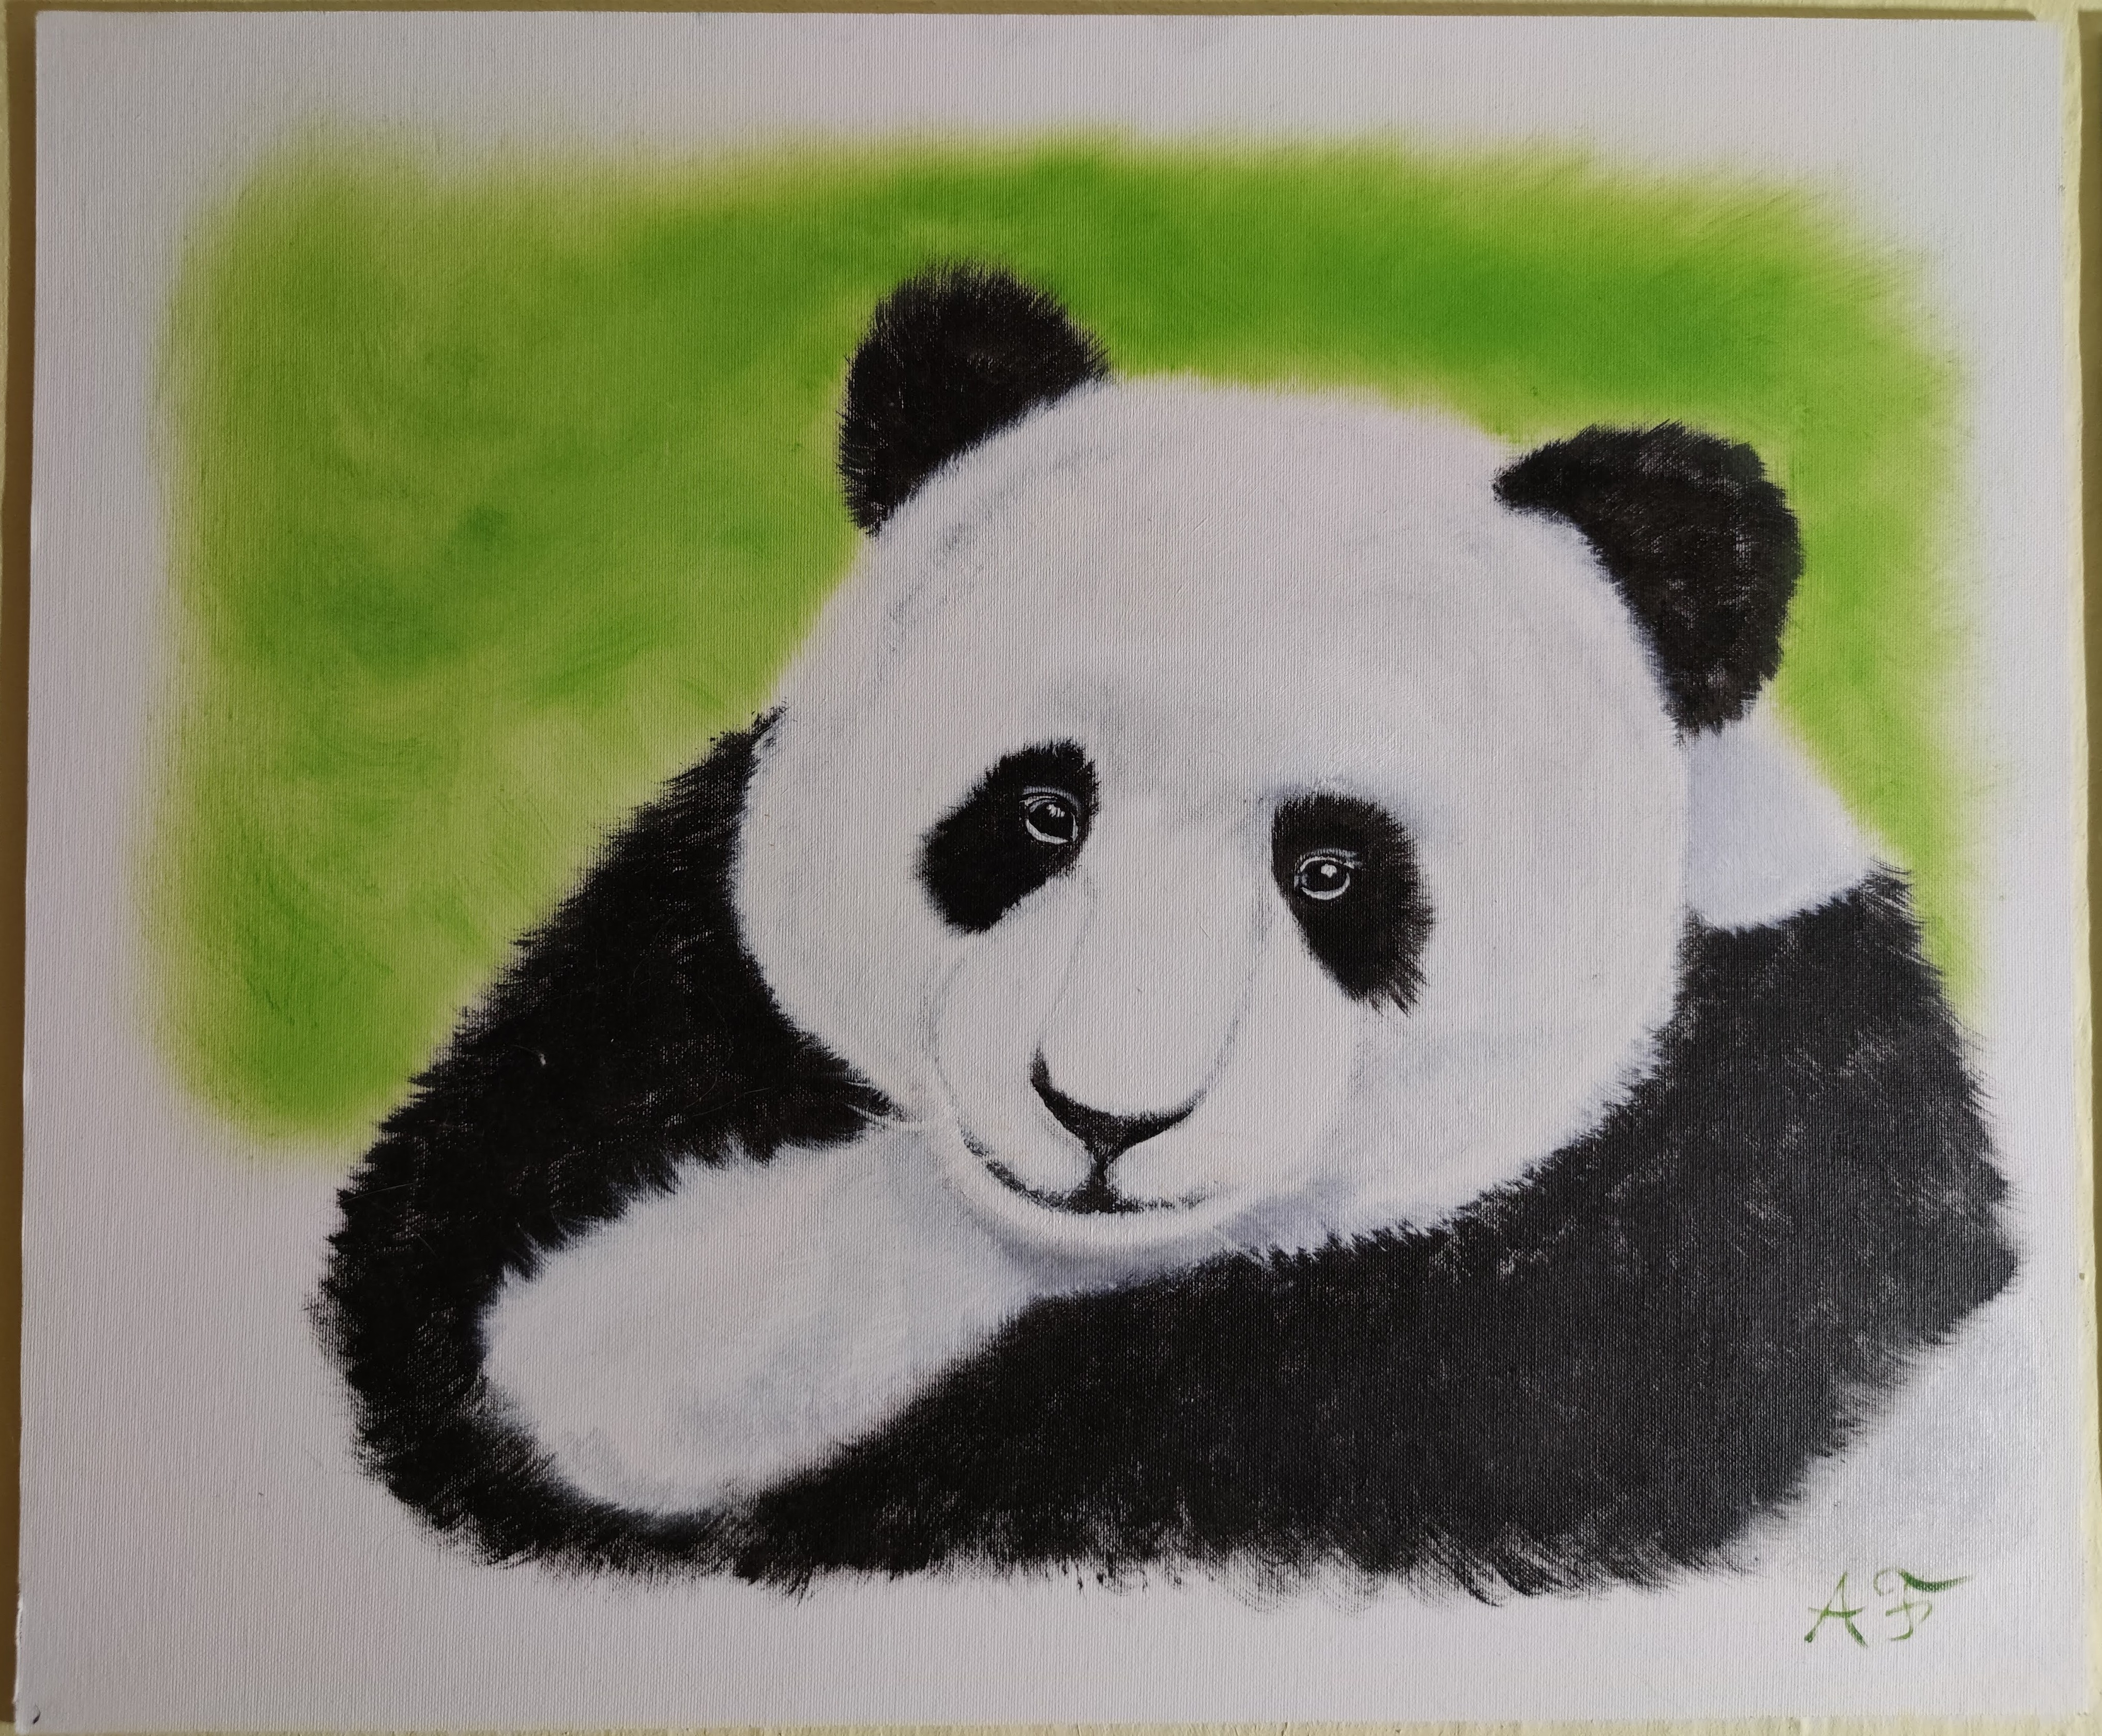 First painted animal was a Panda. Combination of acryl background phase and oil coloring.